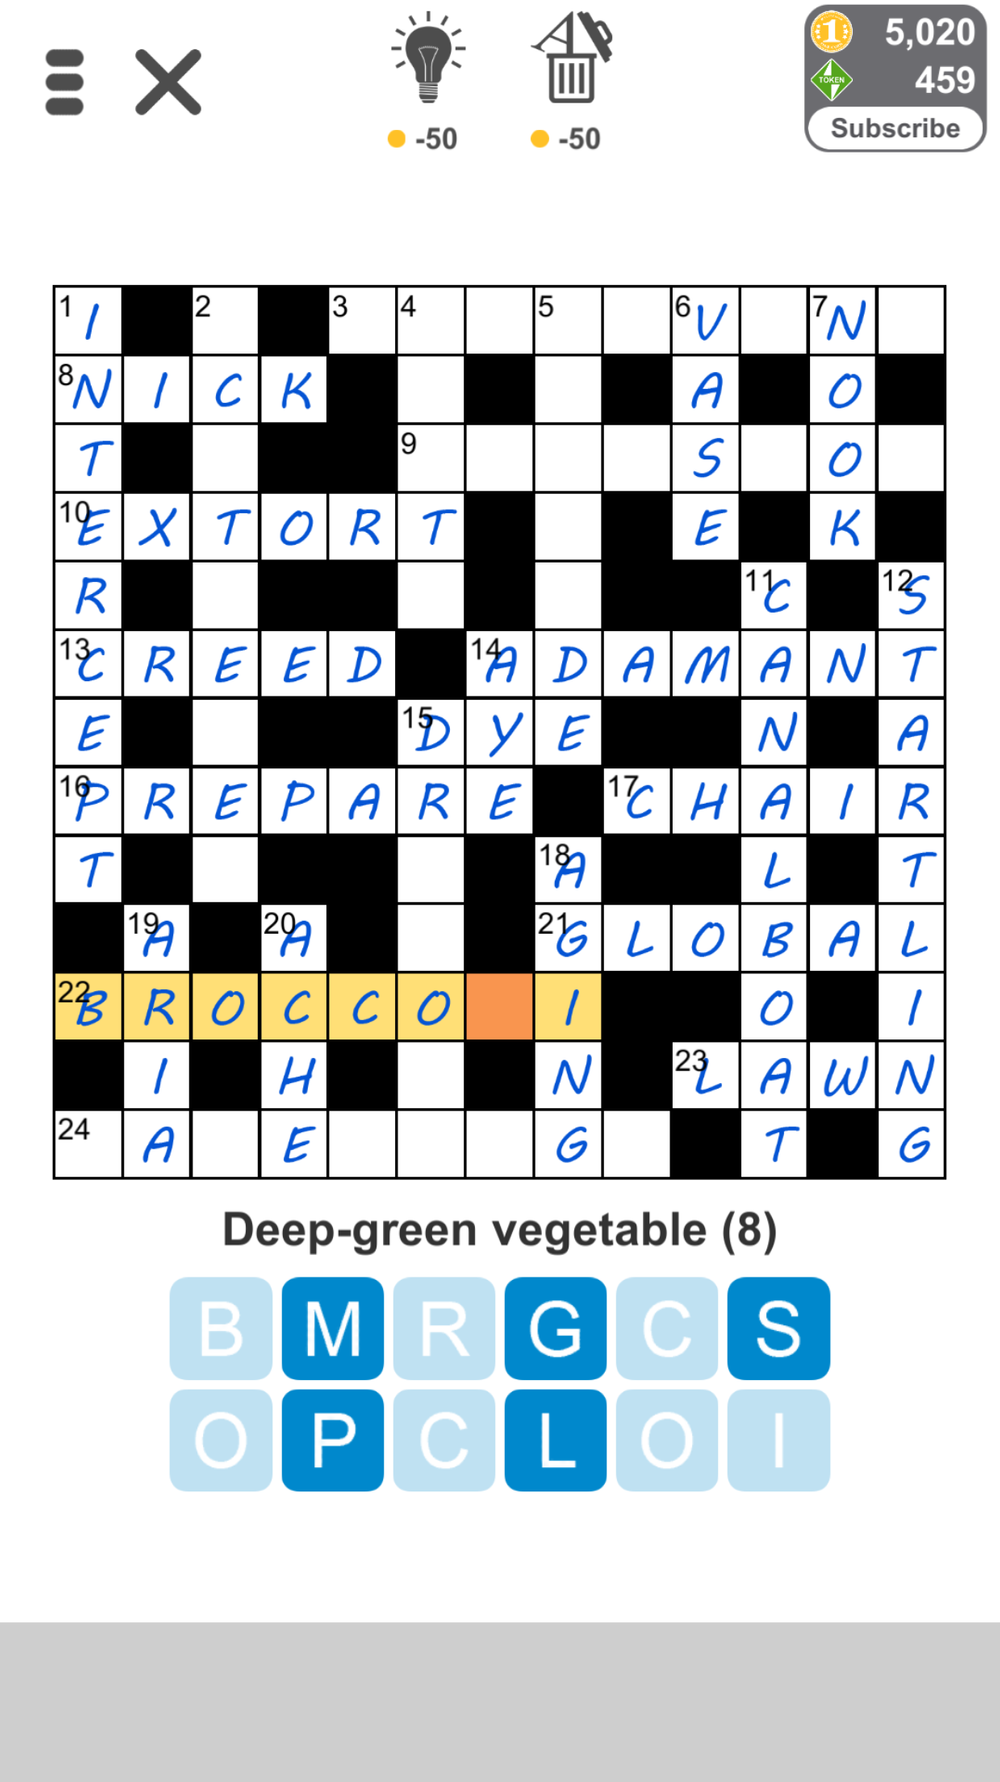 Releases New Daily Puzzle Page 